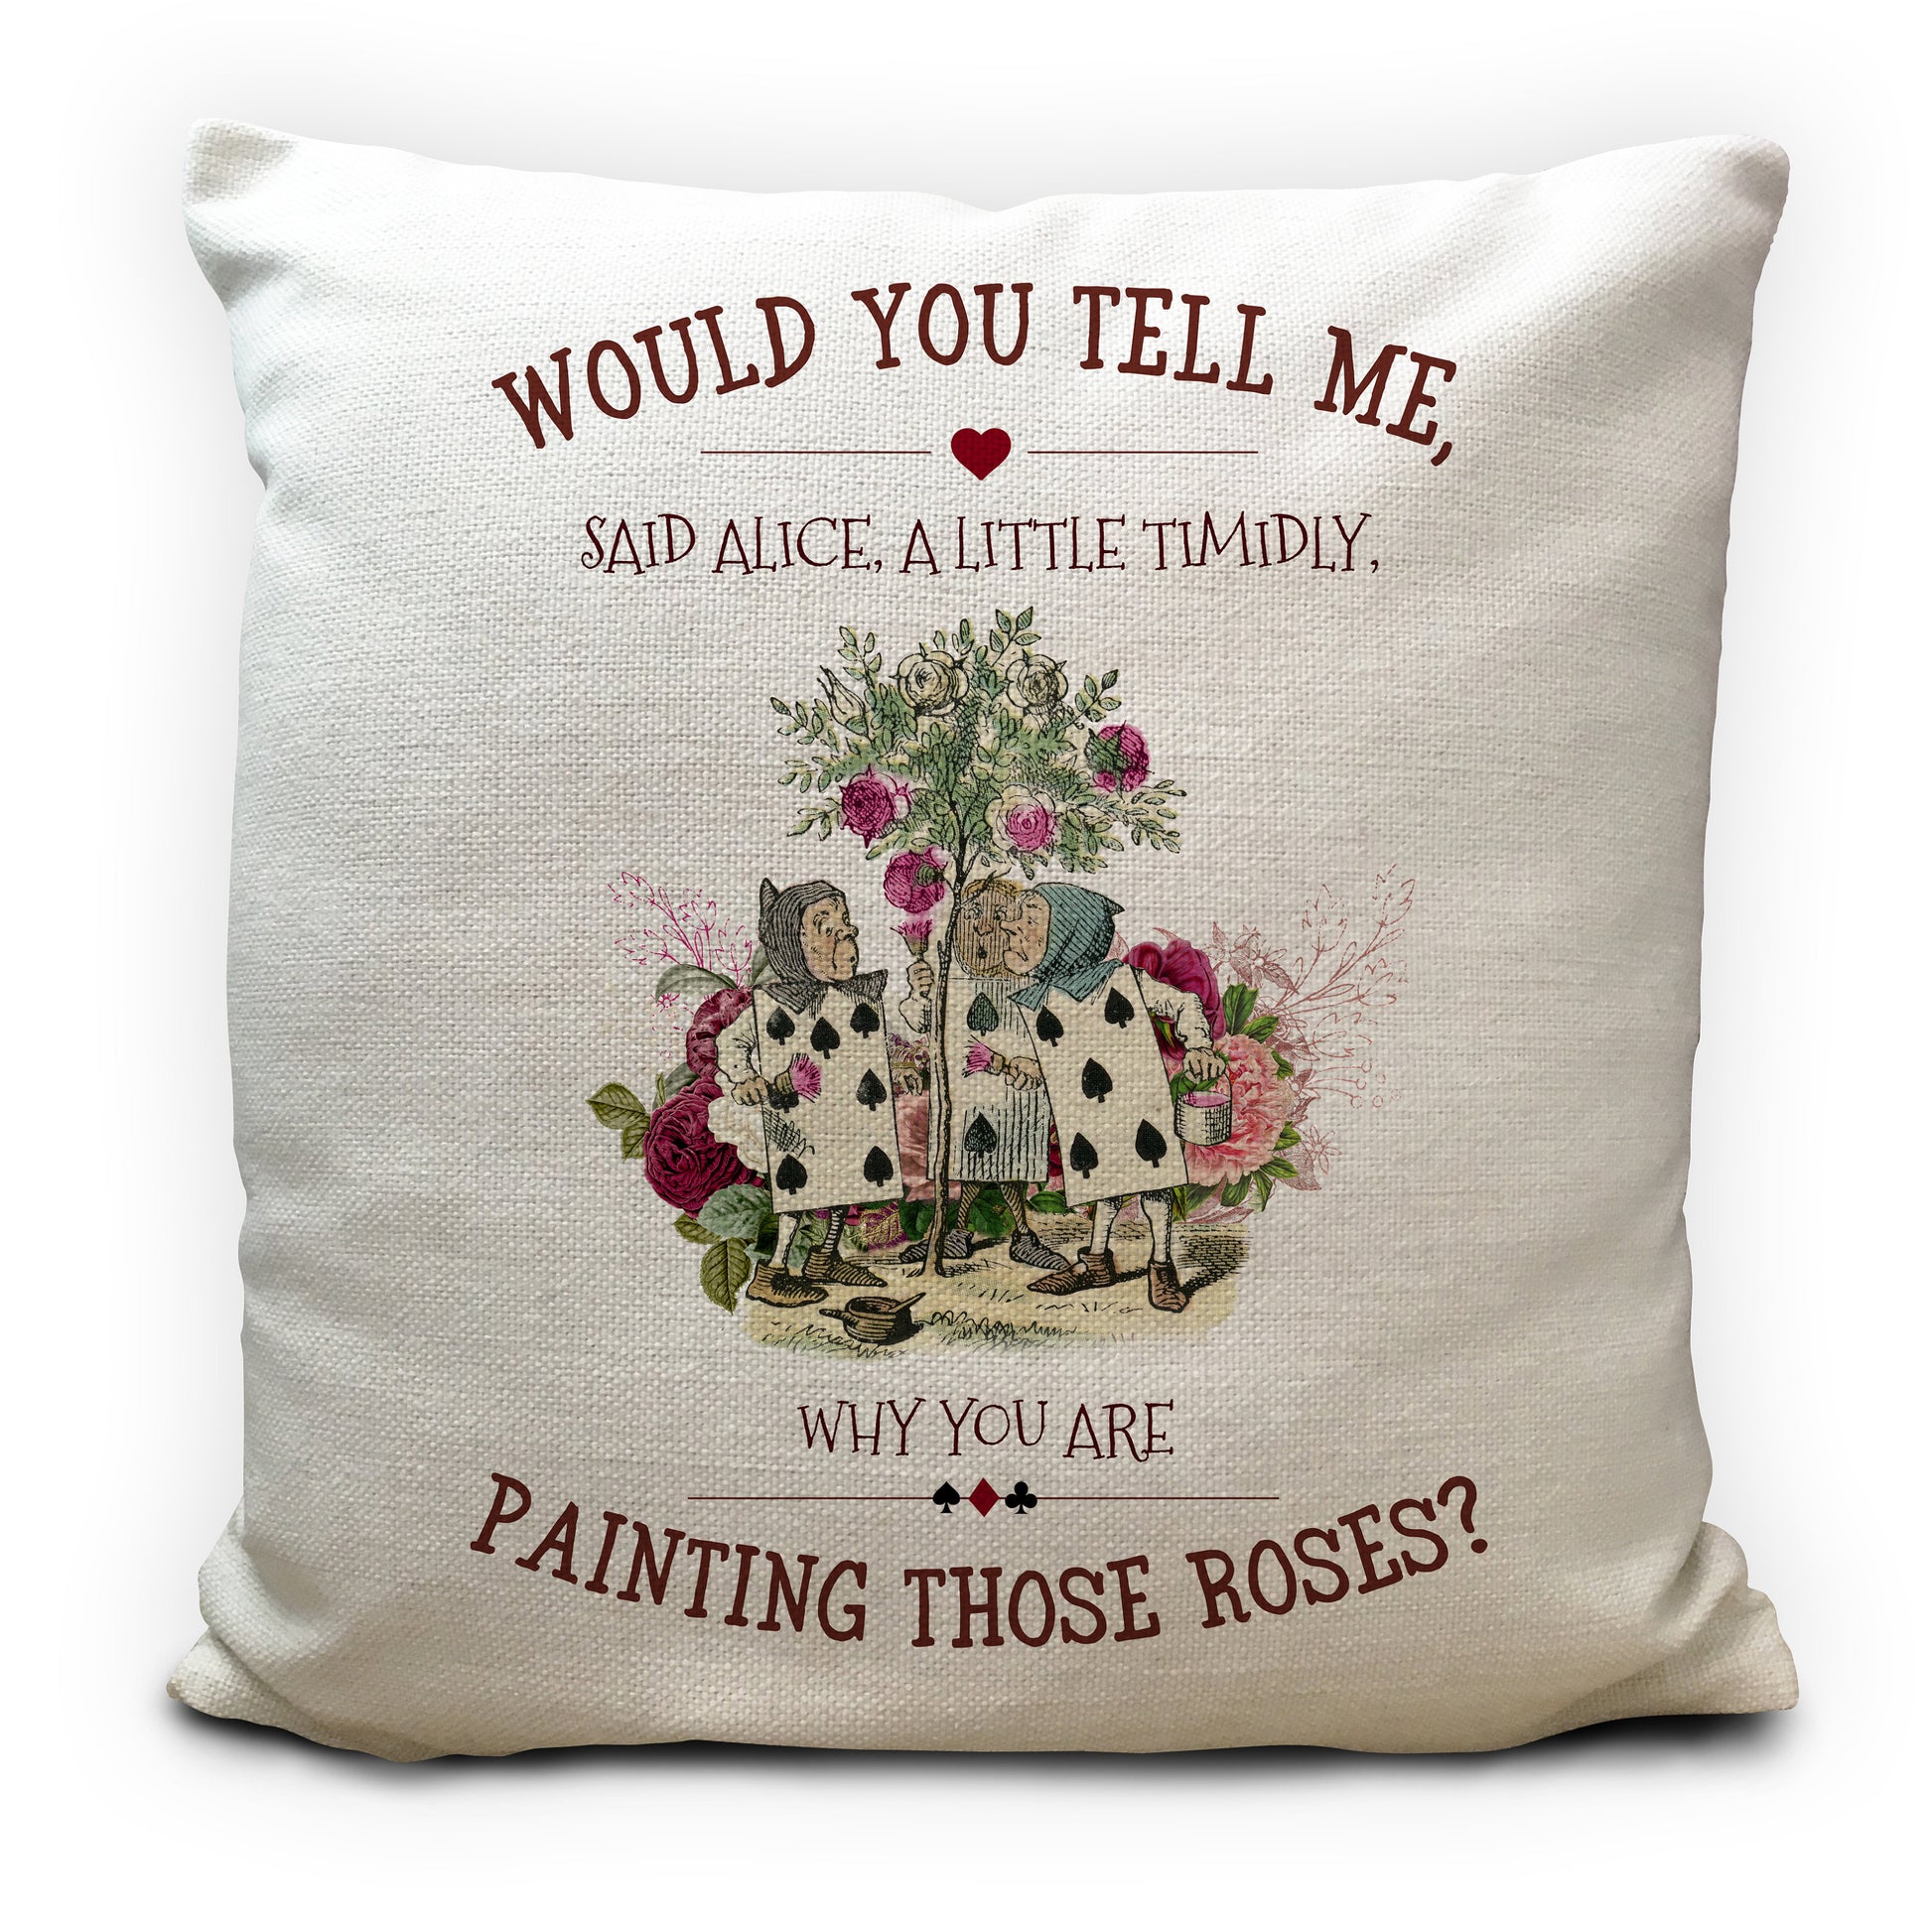 Alice in wonderland cushion cover with playing cards illustration